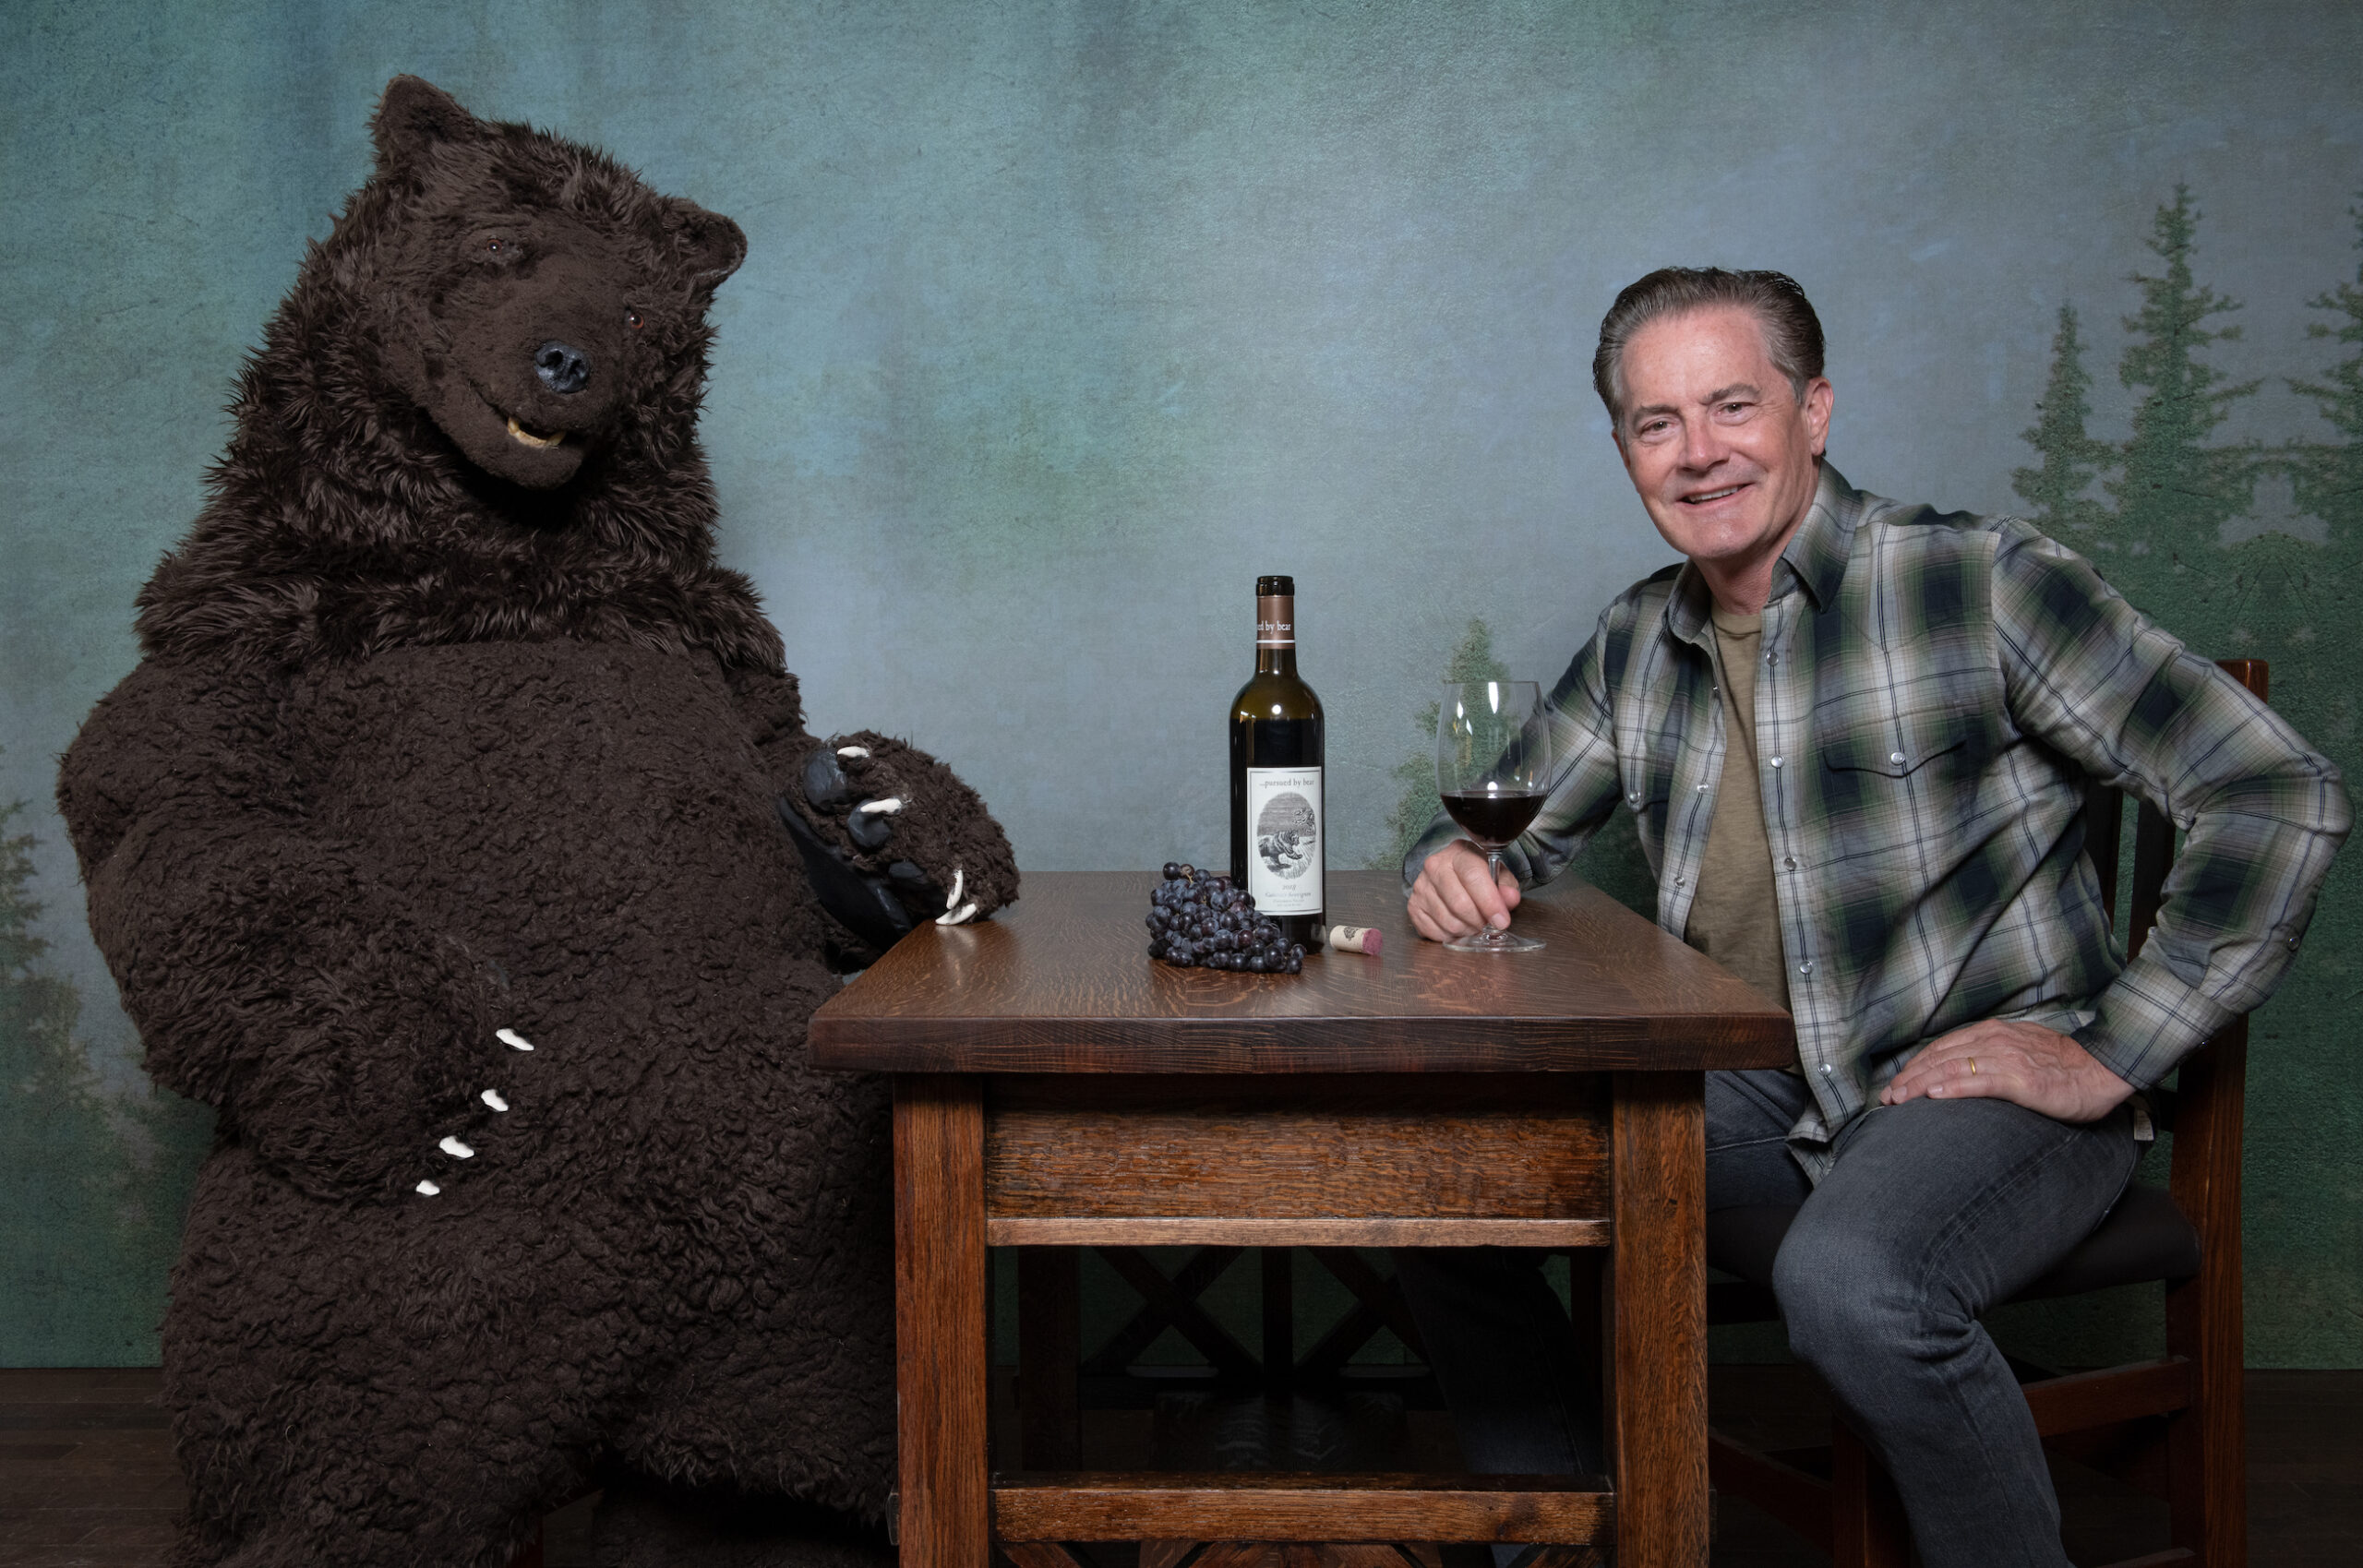 Bear and Kyle having a glass of wine together